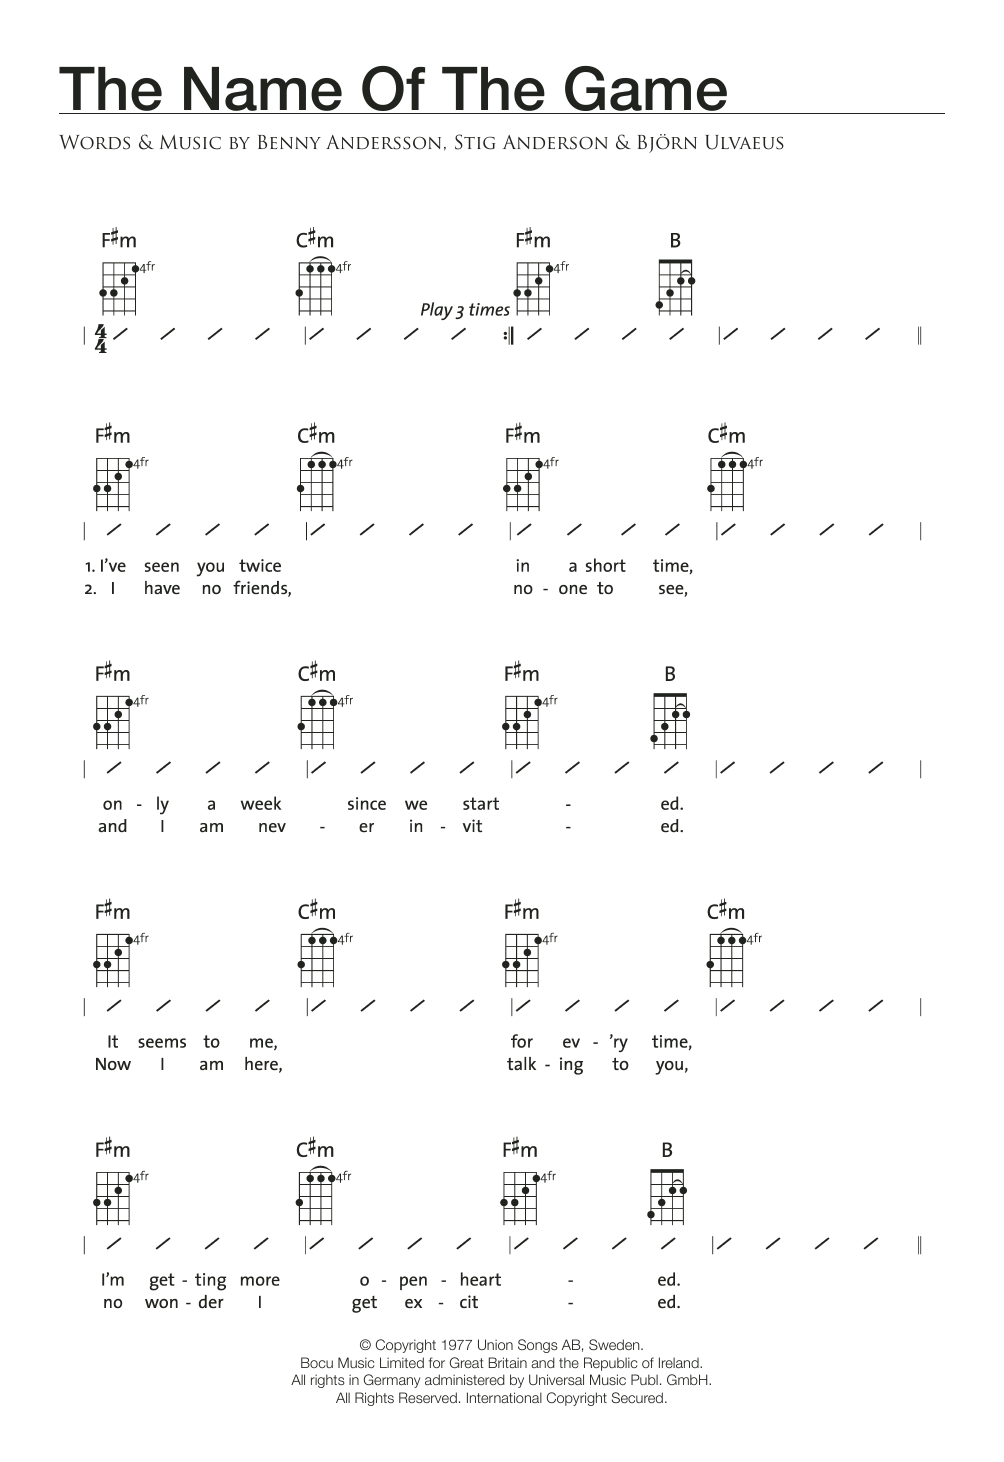 Download ABBA The Name Of The Game Sheet Music